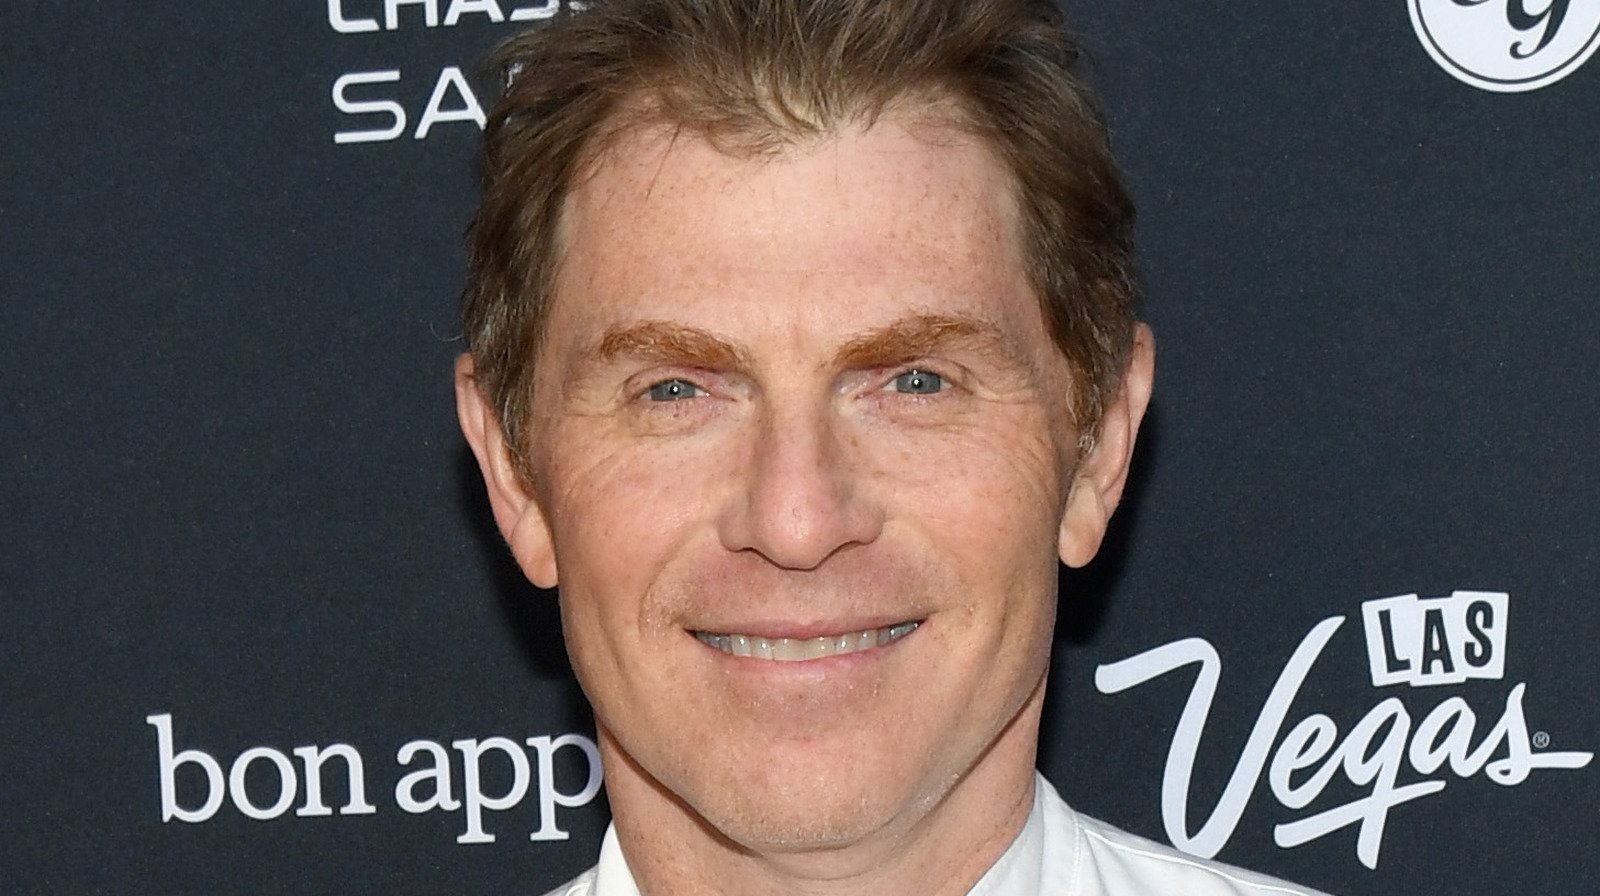 The Truth About Bobby Flay's First Restaurant